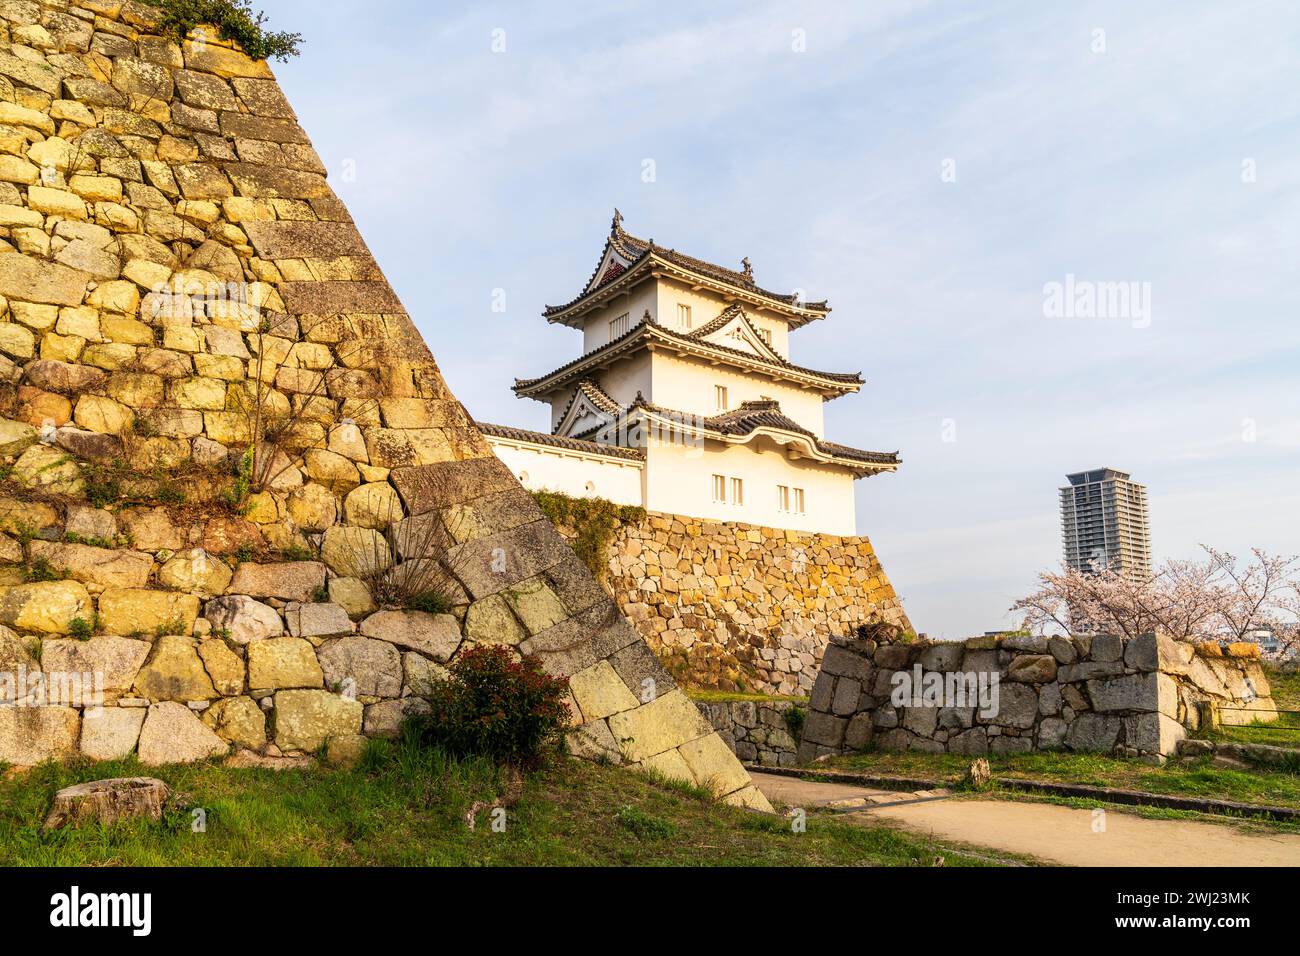 Akashi castle in Japan. The Hitsujisaru yagura, turret, with in foreground, ishigaki stone walls with path between them, cherry blossoms and blue sky. Stock Photo